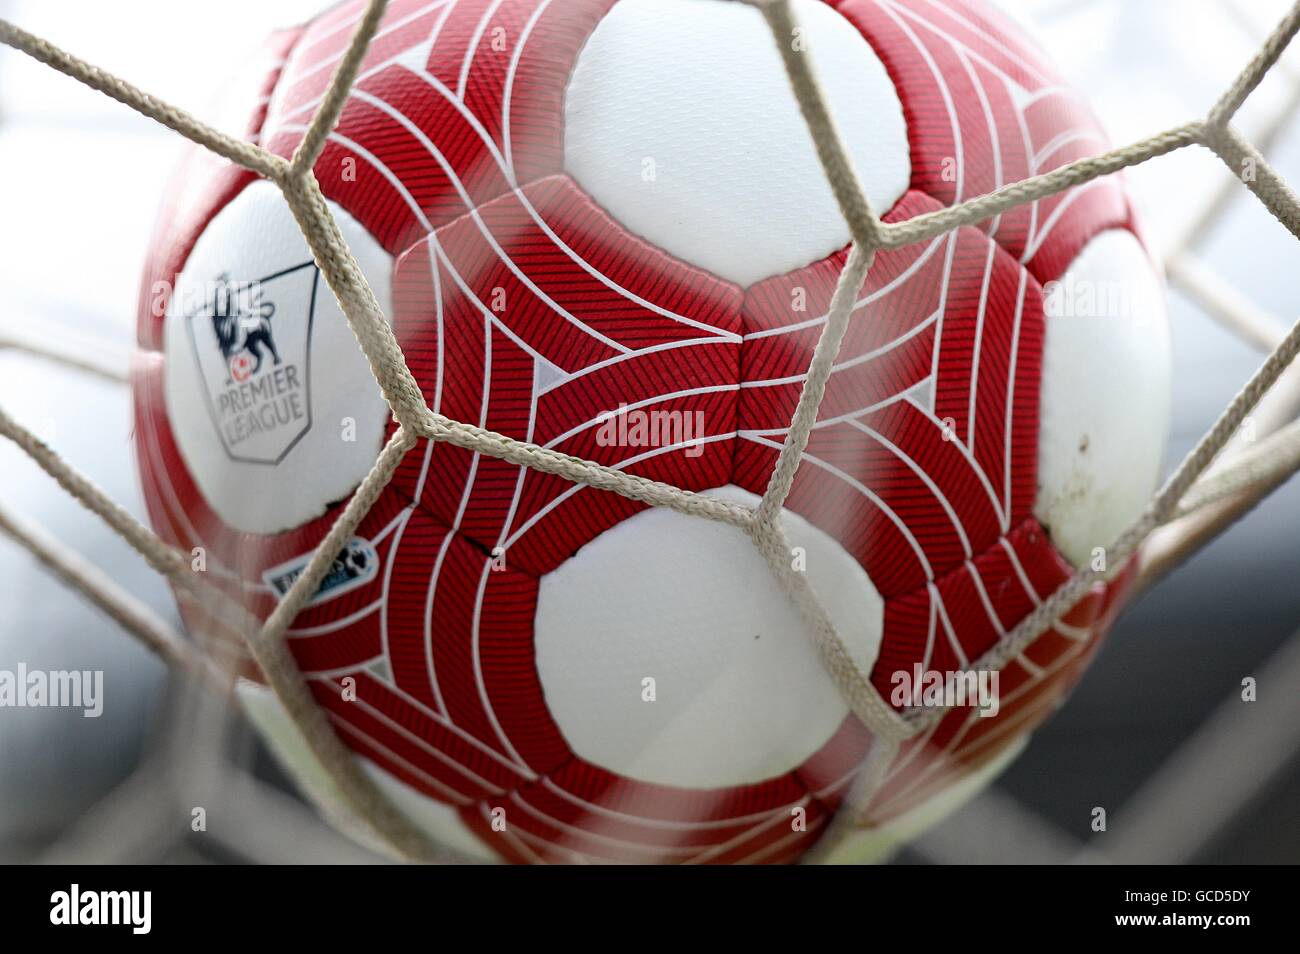 A view of the special red-coloured version of the usual official Nike T90  Ascente ball, as part of the Red charity campaign to fight AIDS in Africa  Stock Photo - Alamy